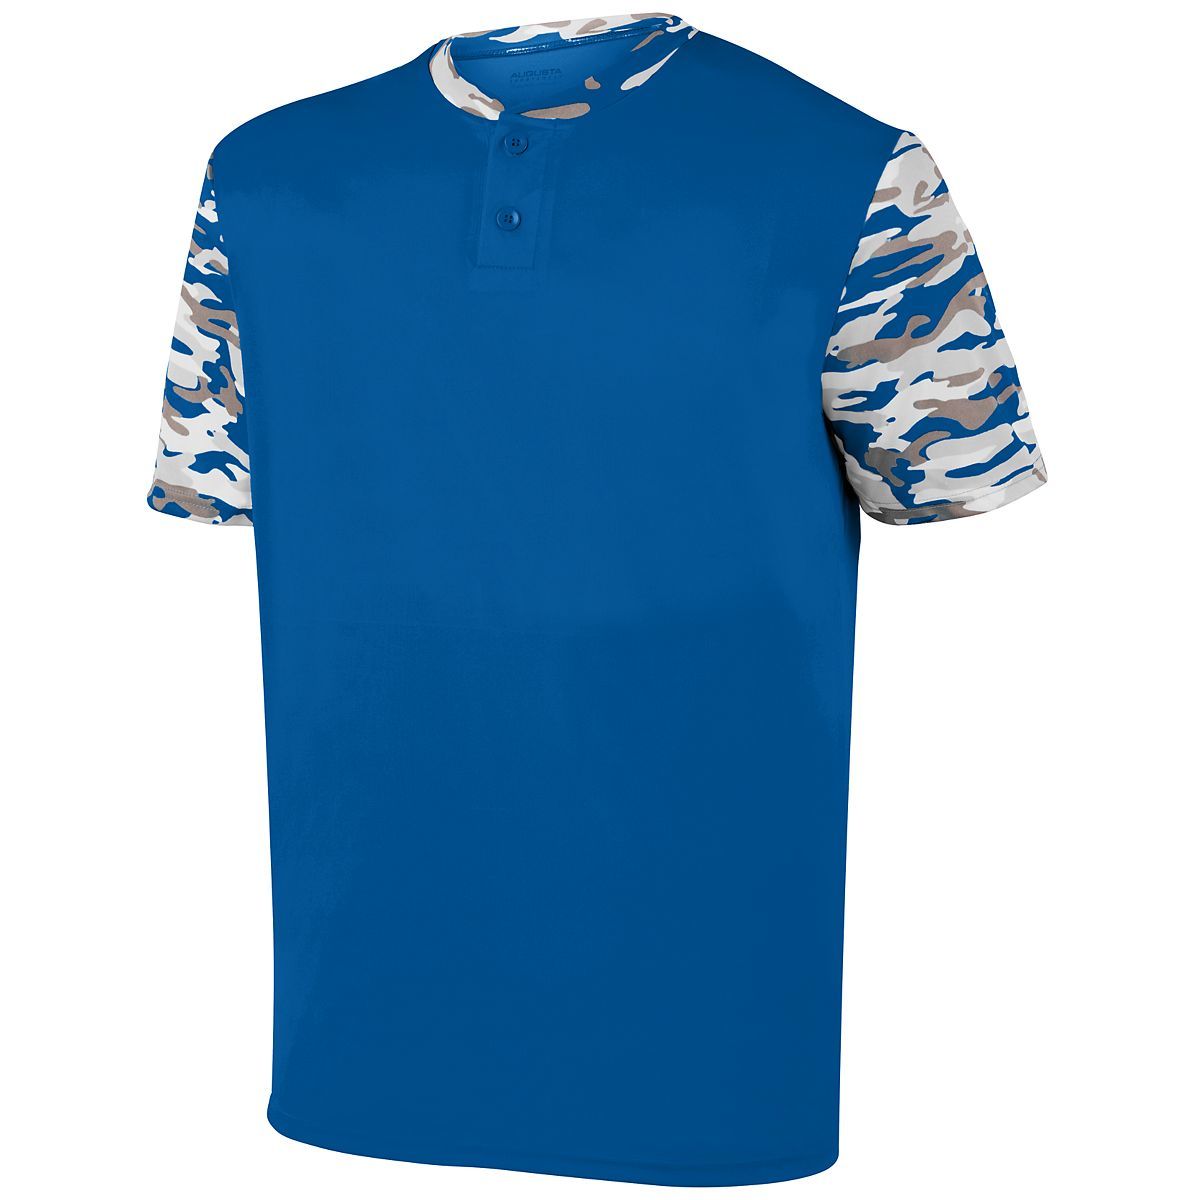 Augusta Sportswear Pop Fly Jersey in Royal/Royal Mod  -Part of the Adult, Adult-Jersey, Augusta-Products, Baseball, Shirts, All-Sports, All-Sports-1 product lines at KanaleyCreations.com